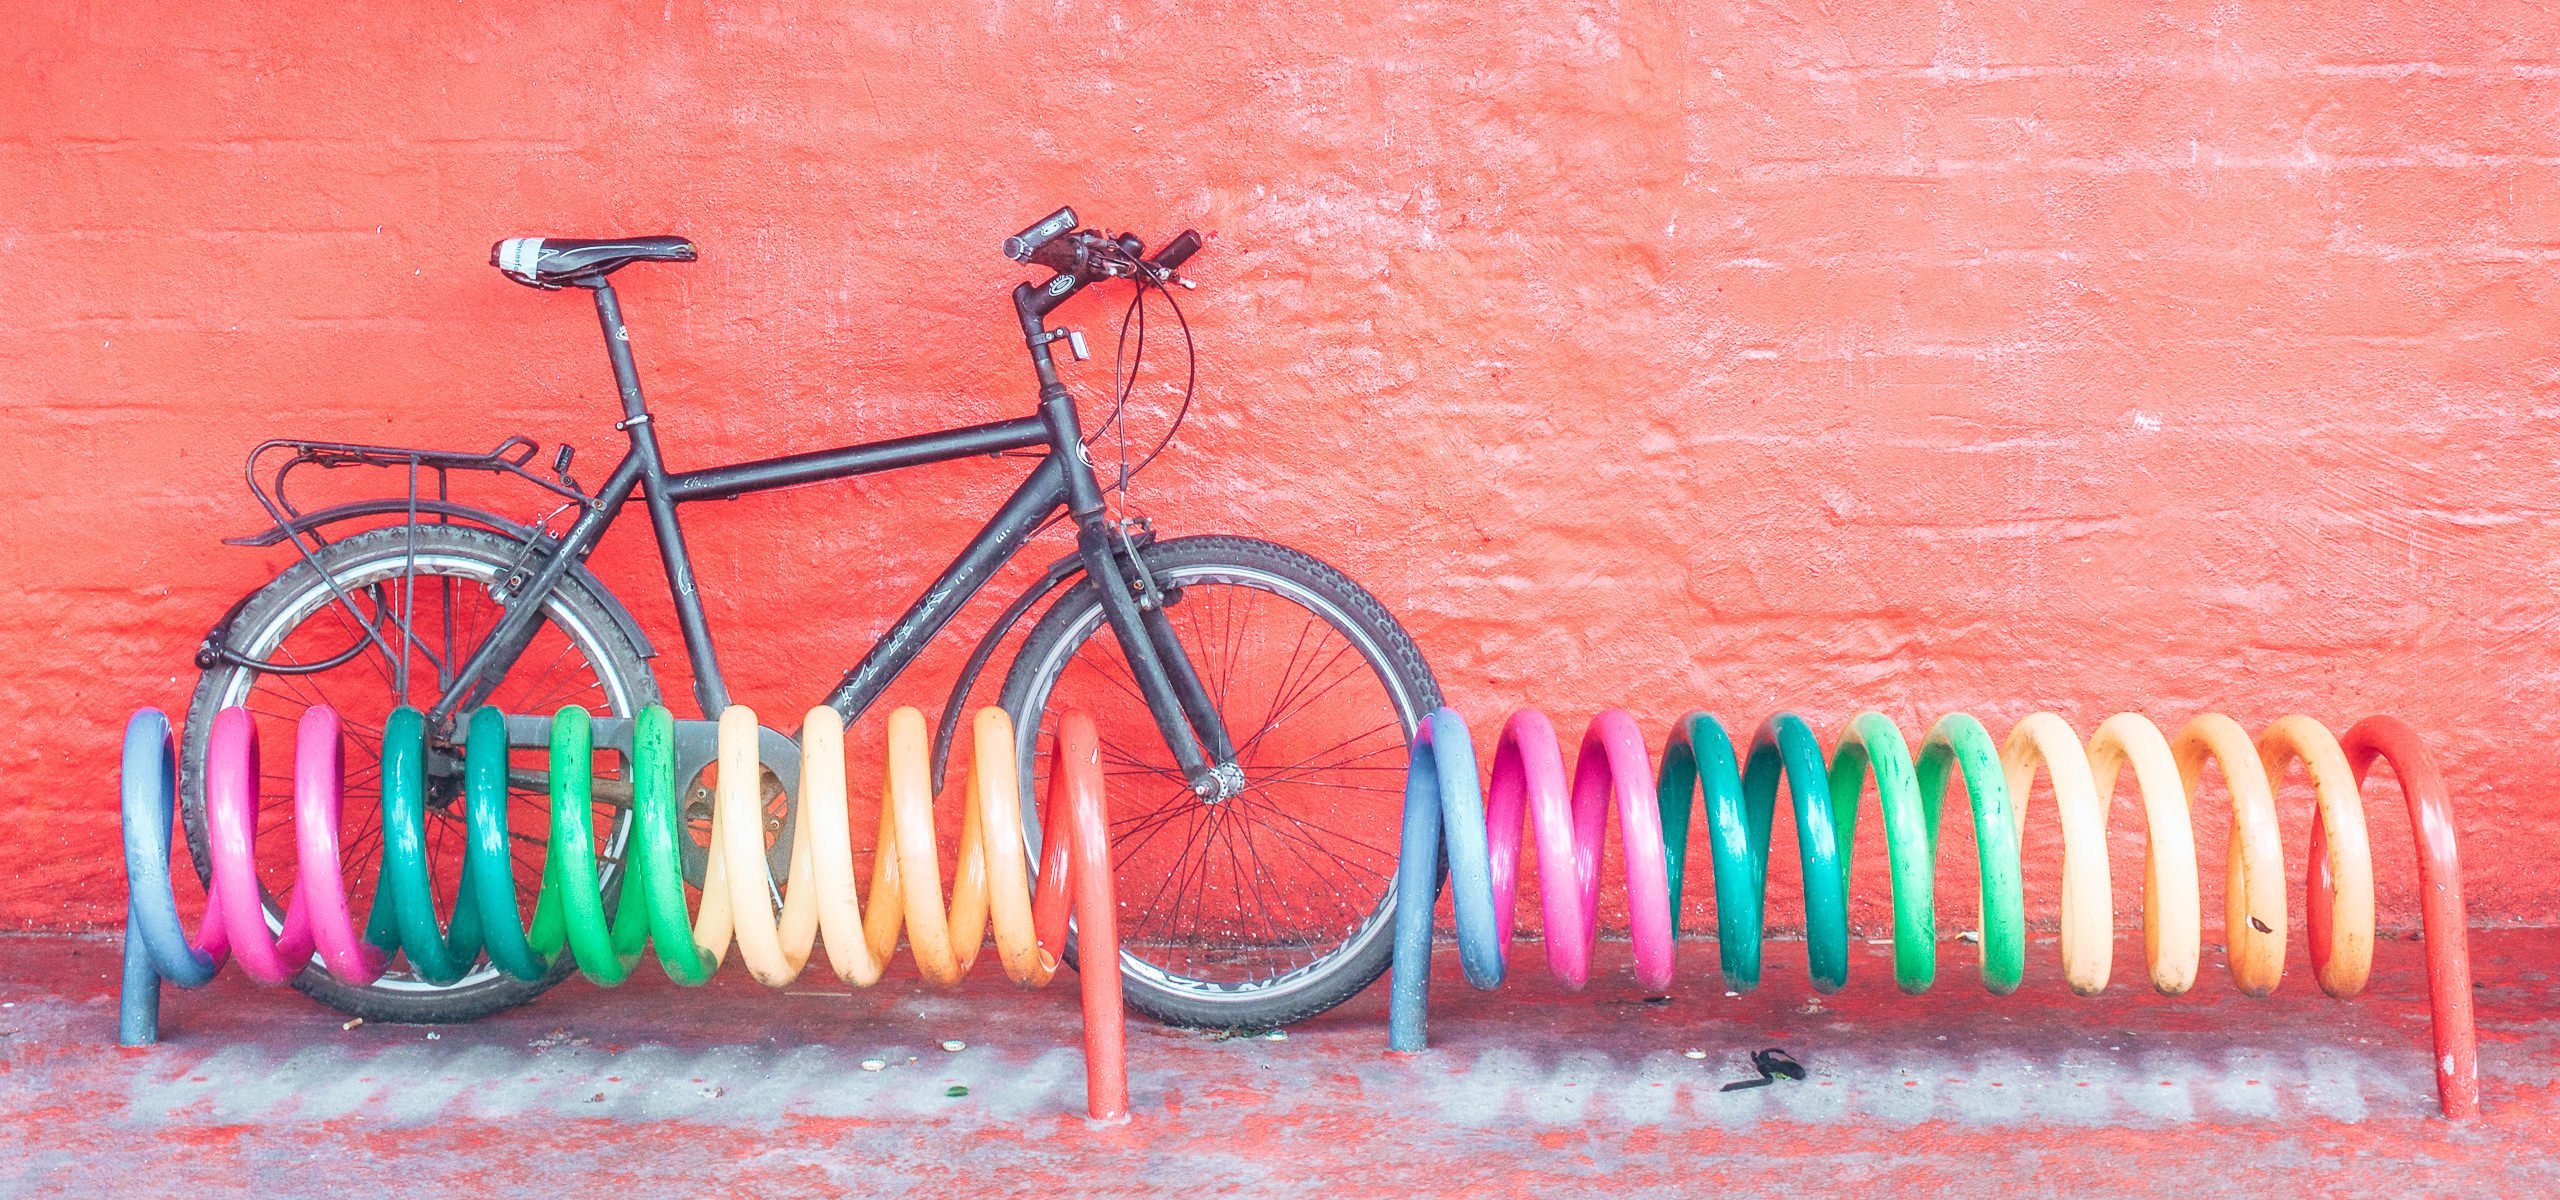 A bicycle against colourful coils and red wall, Copenhagen Denmark